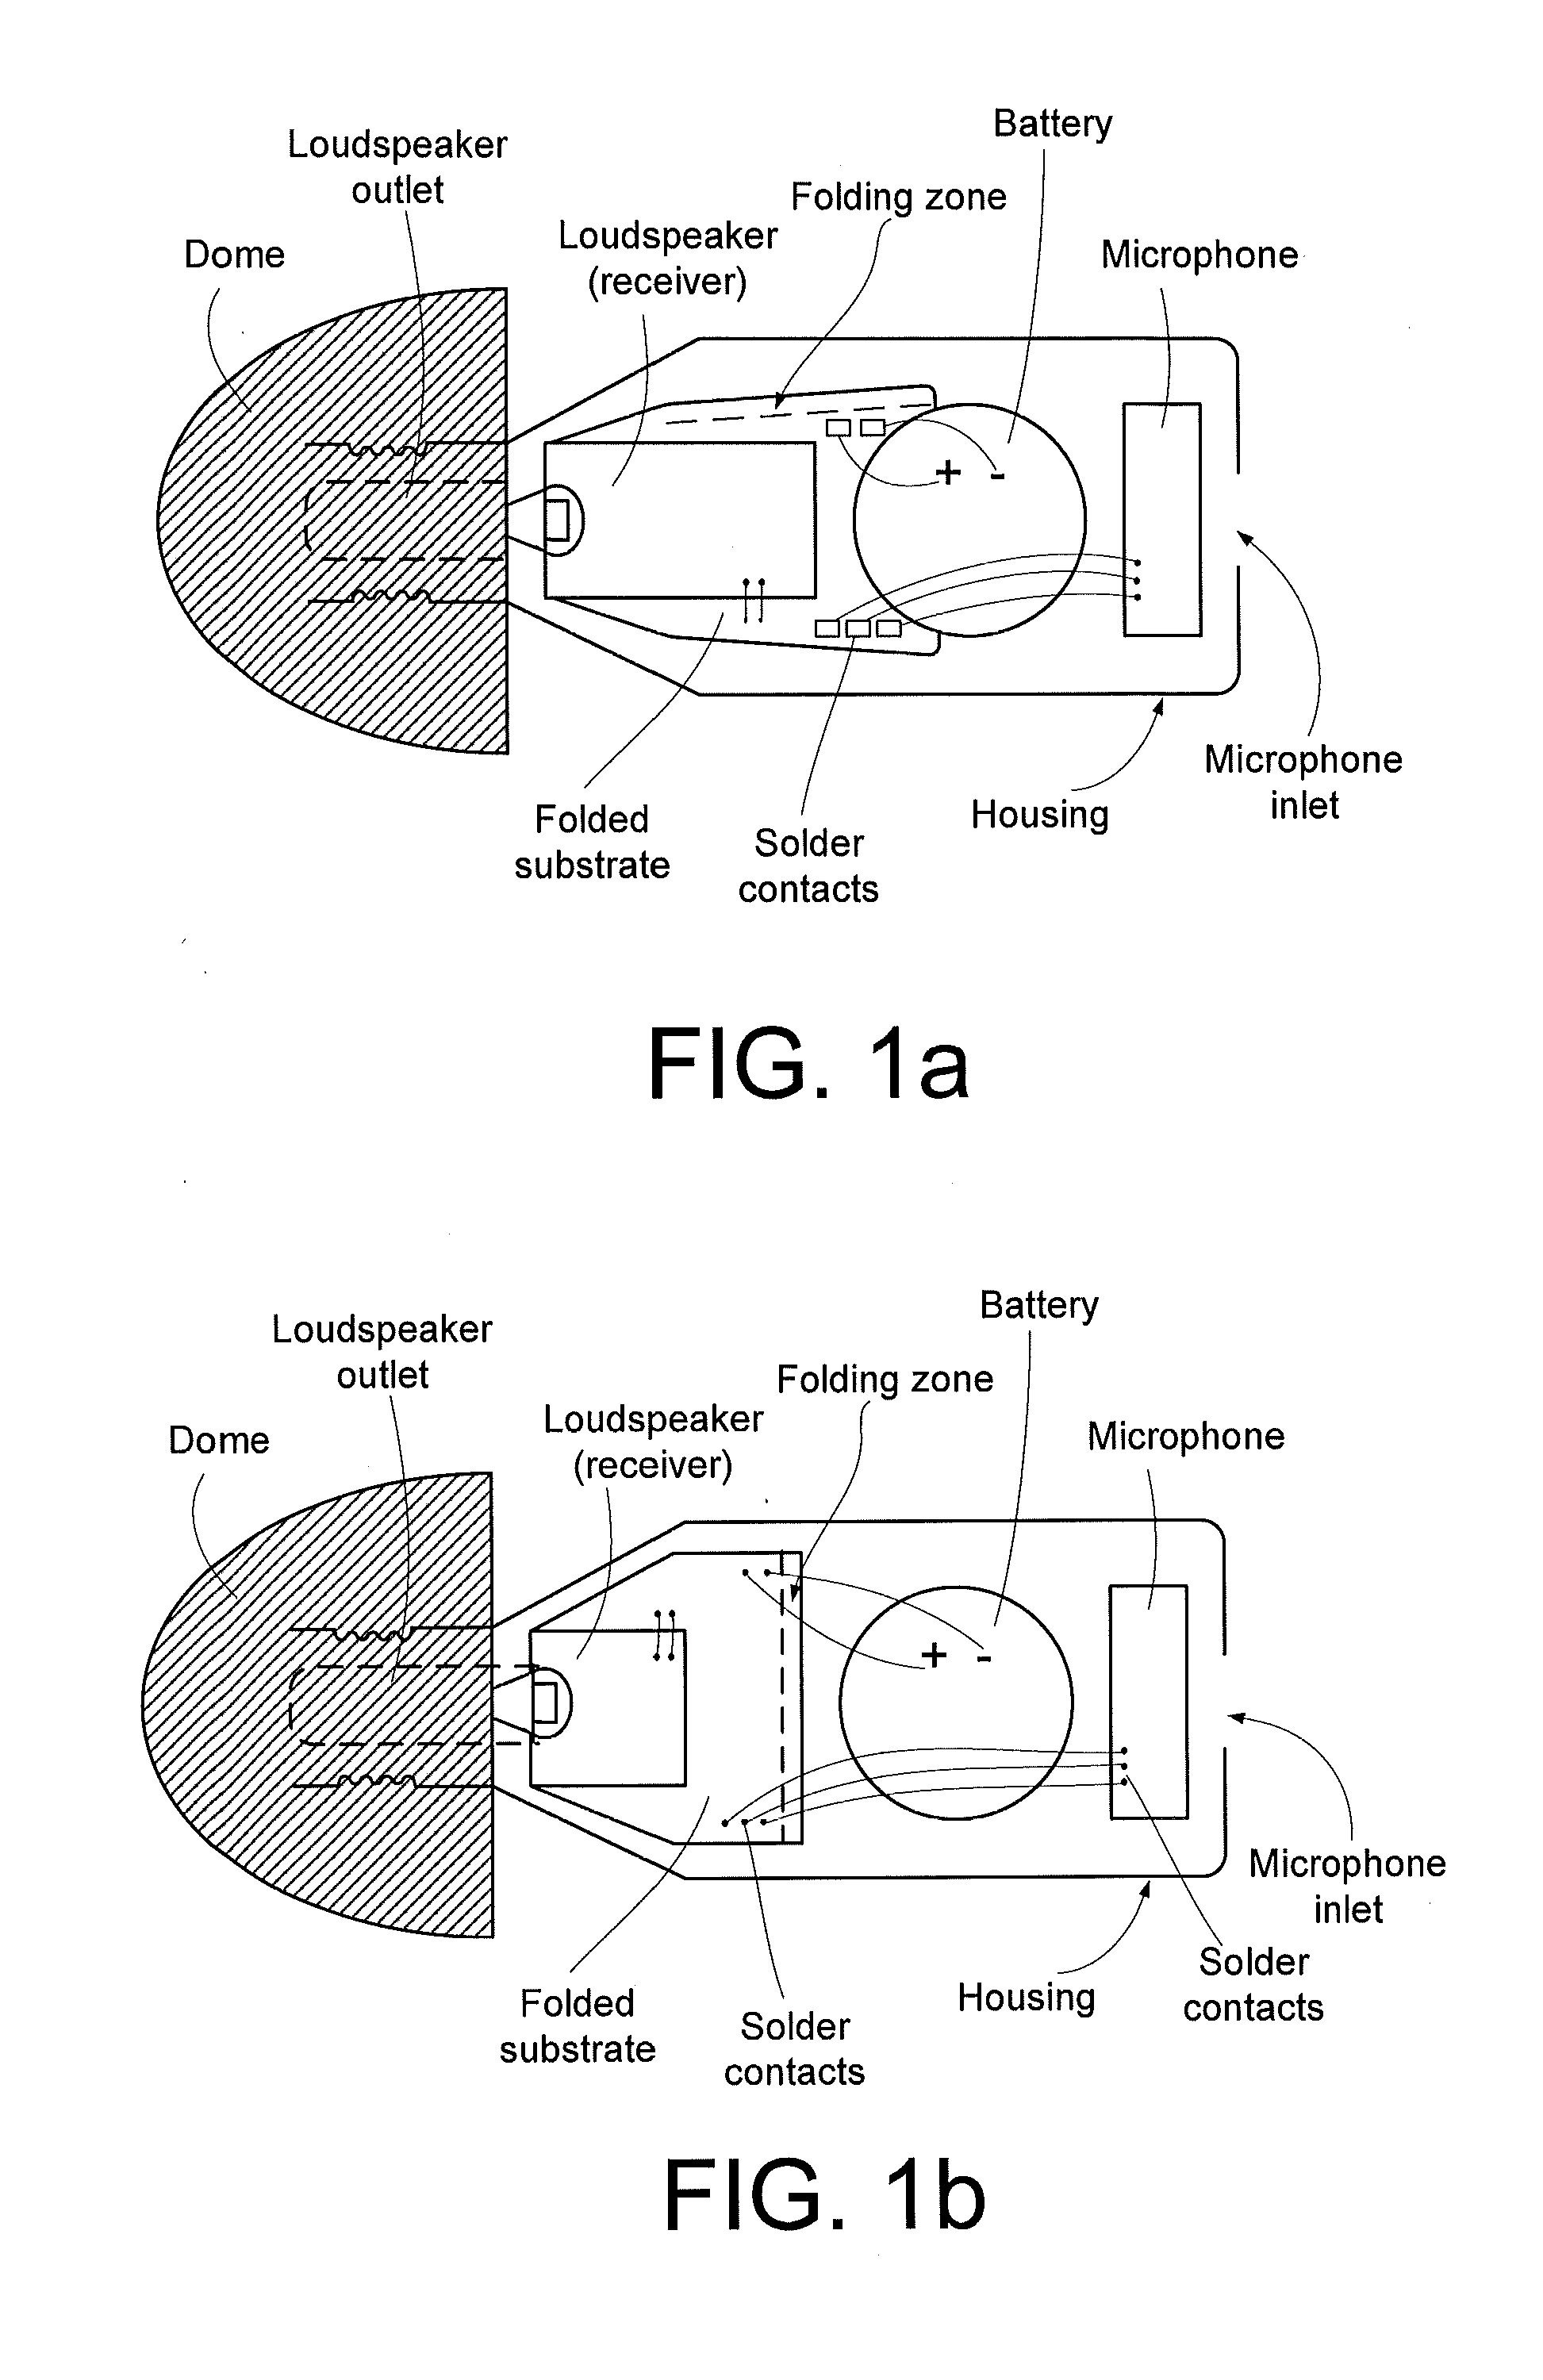 Portable electronic device comprising a folded substrate